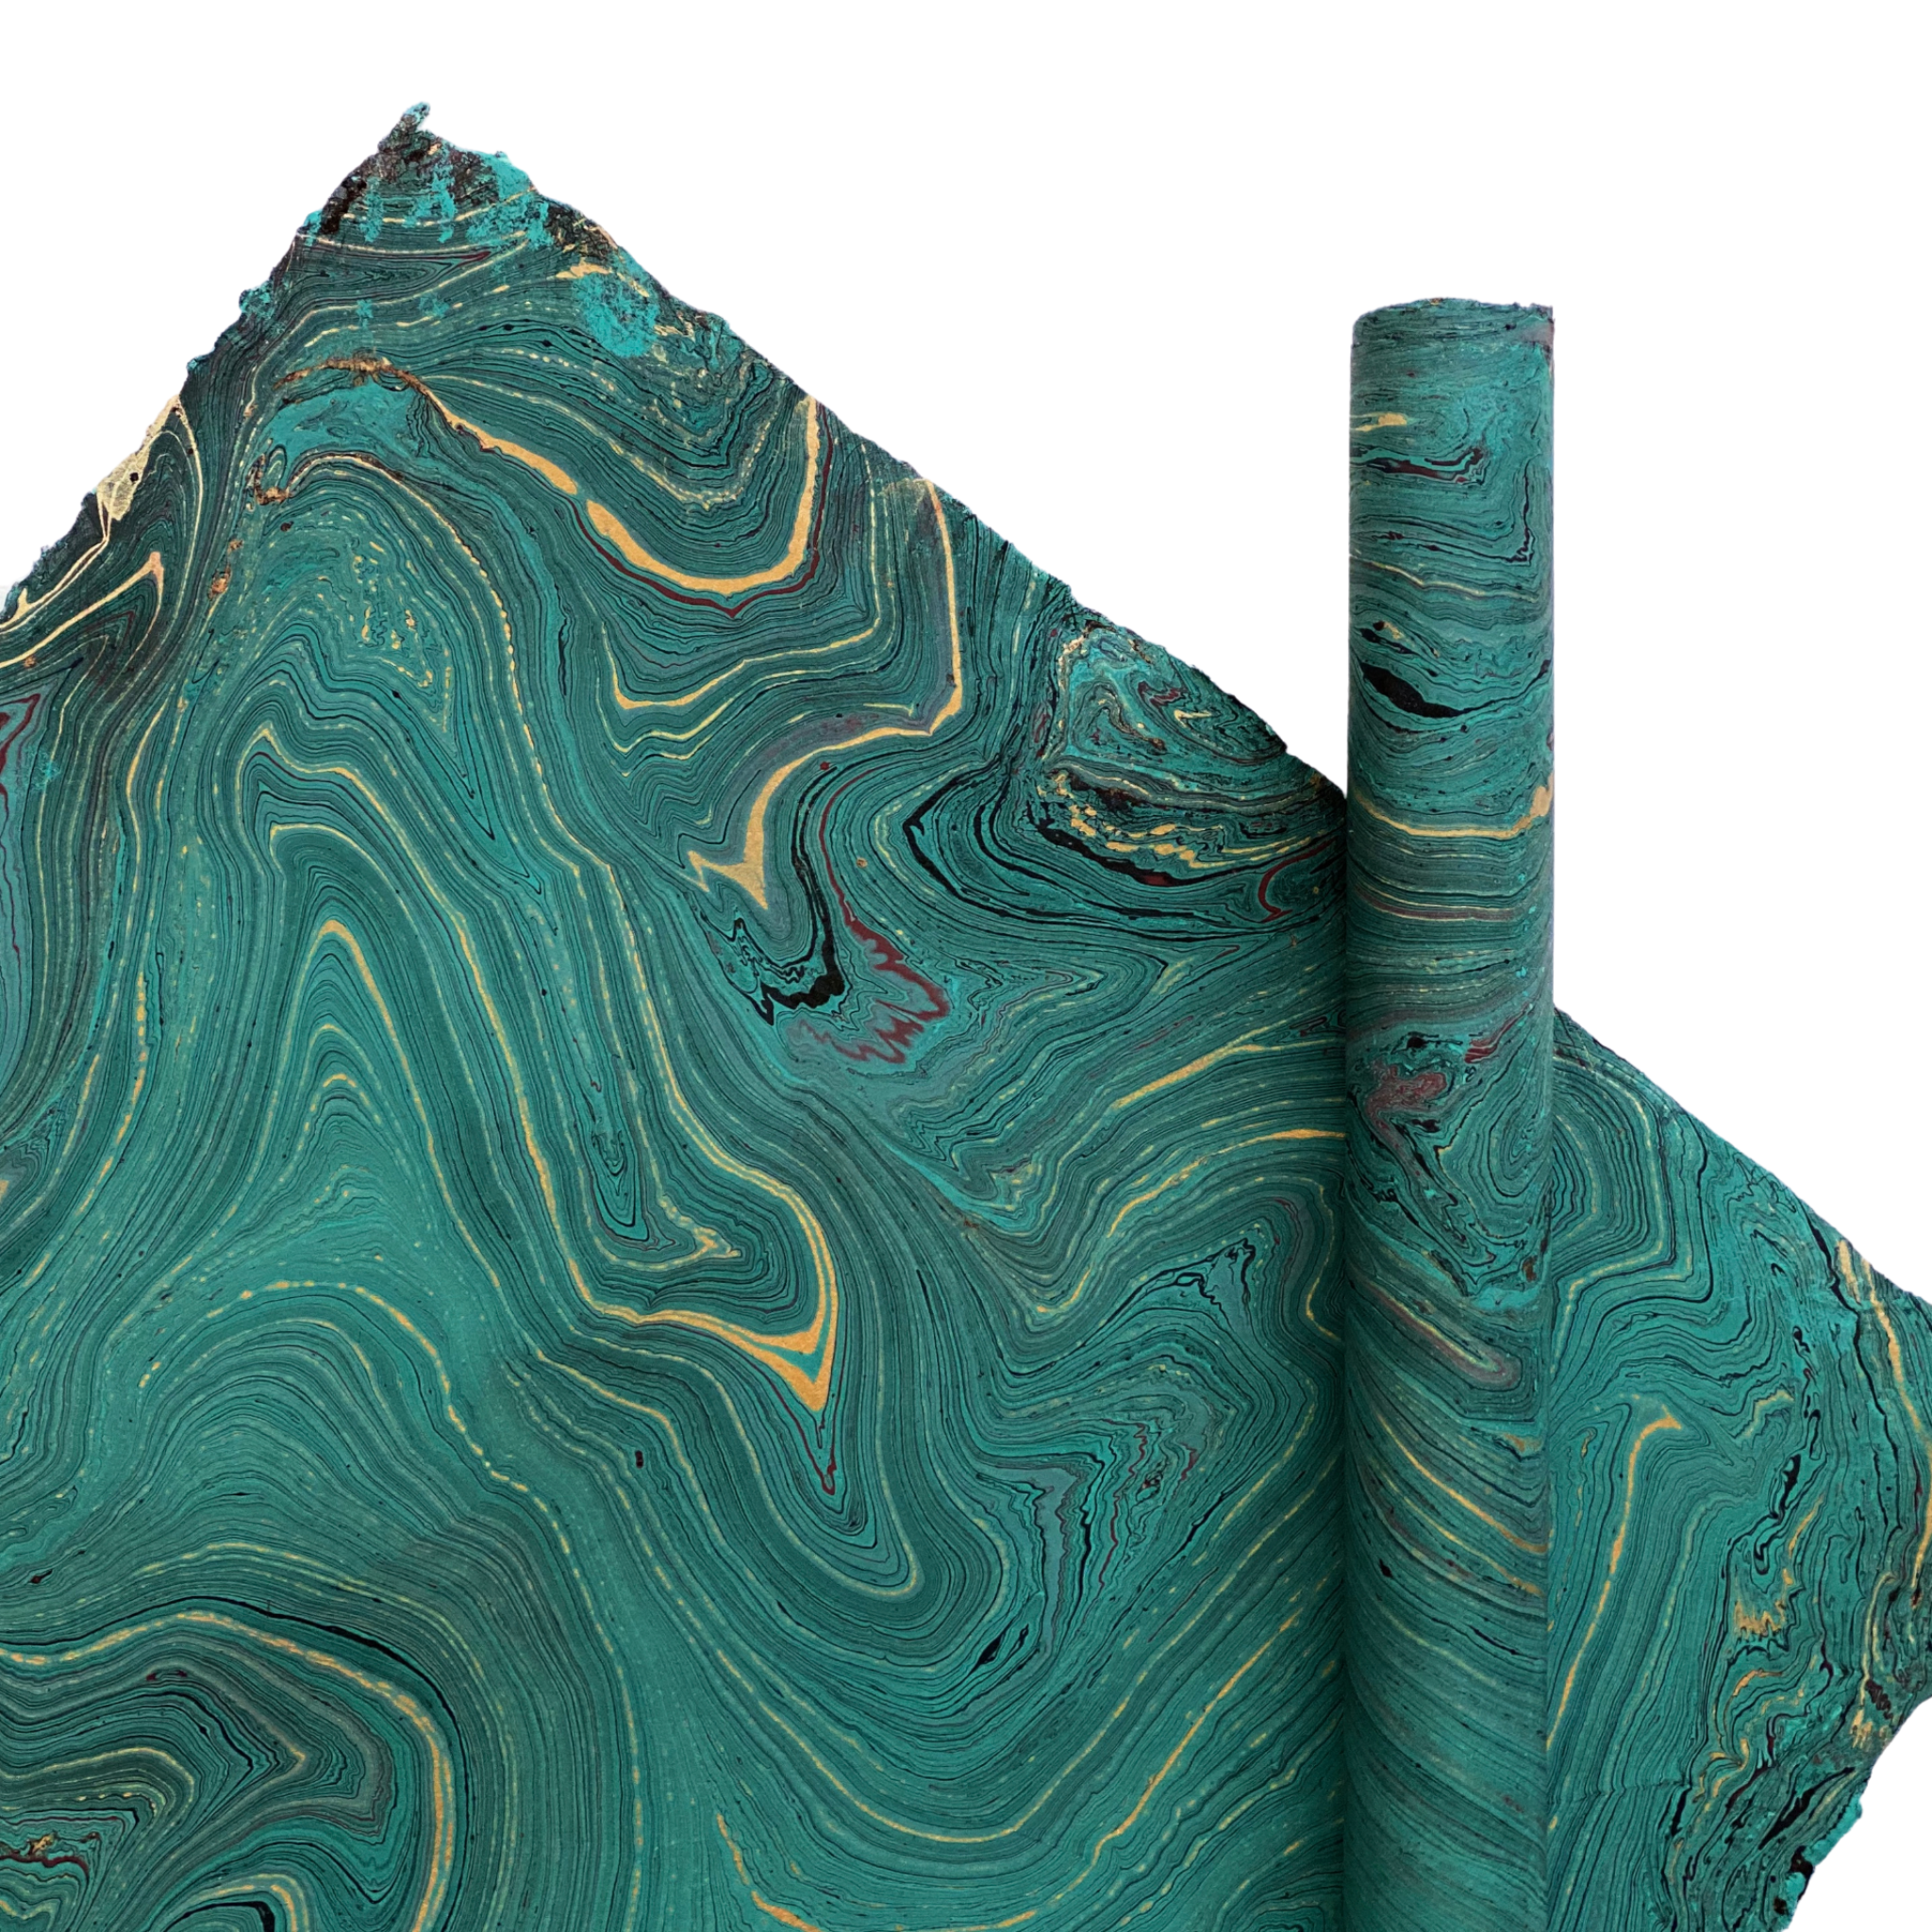 Teal Marbled Handmade Paper Gift Wrap Sheet